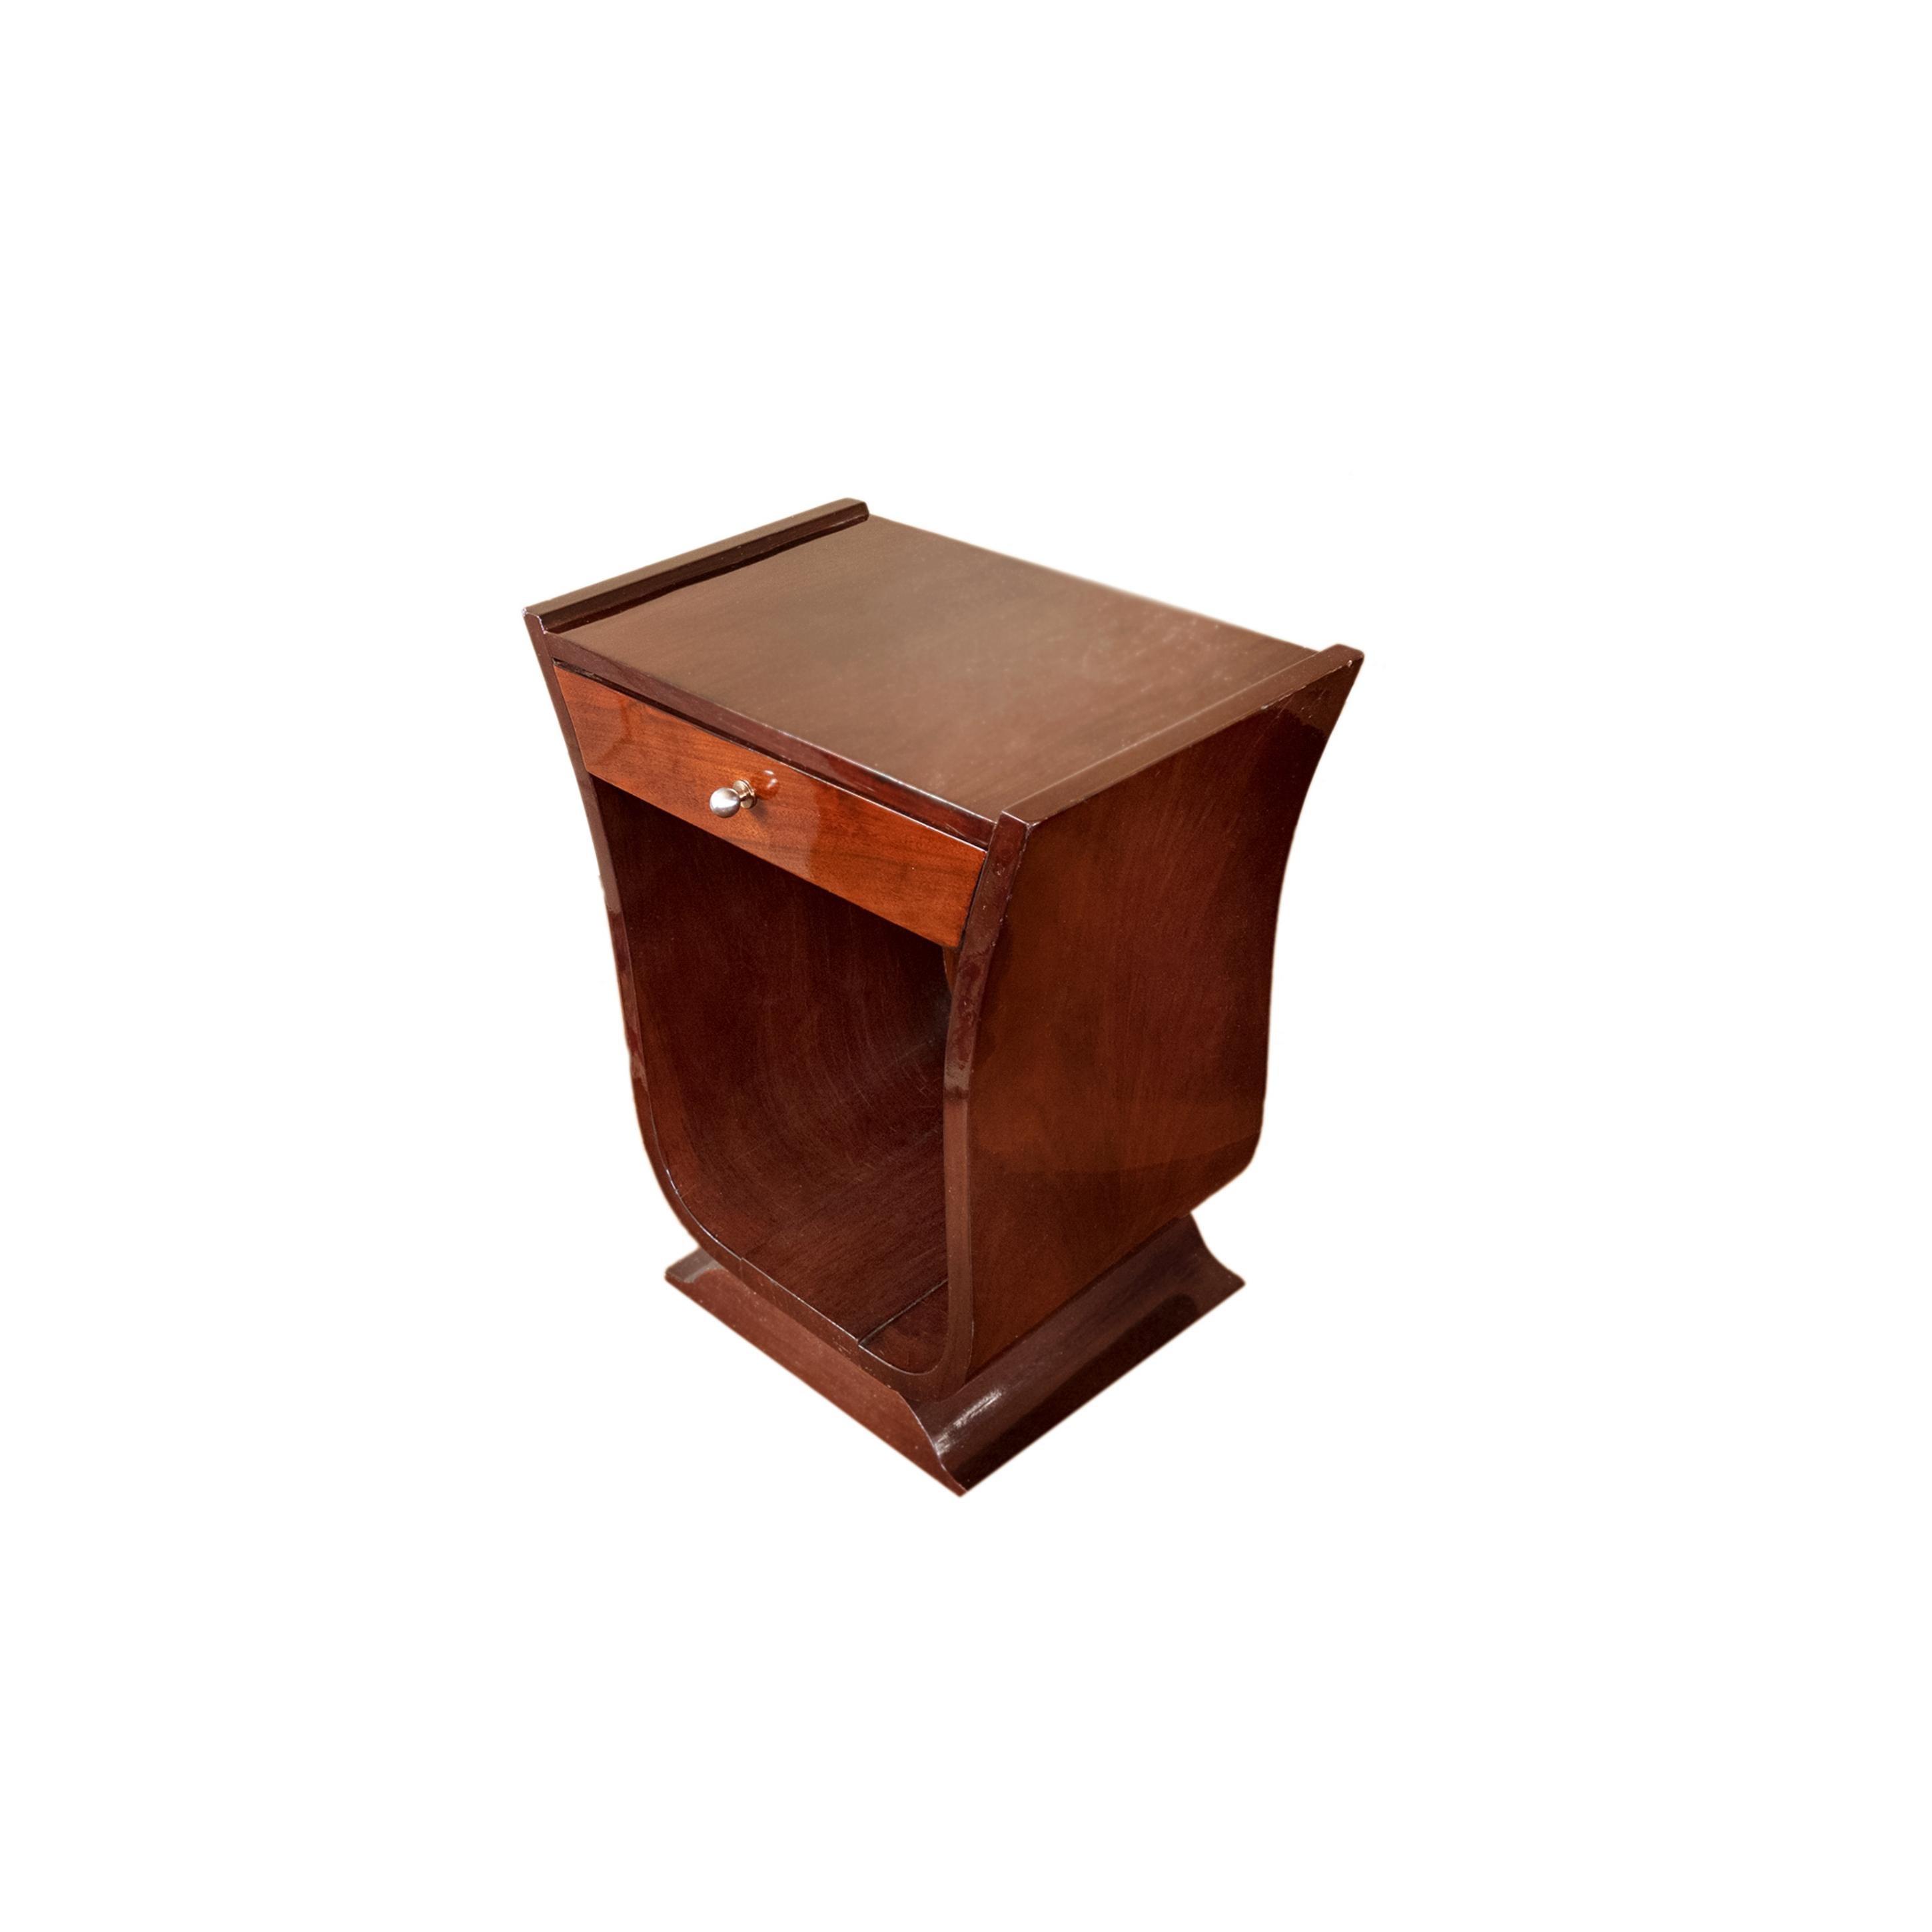 This exquisite 1930s walnut nightstand or side table has a single drawer and is veneer coated.
